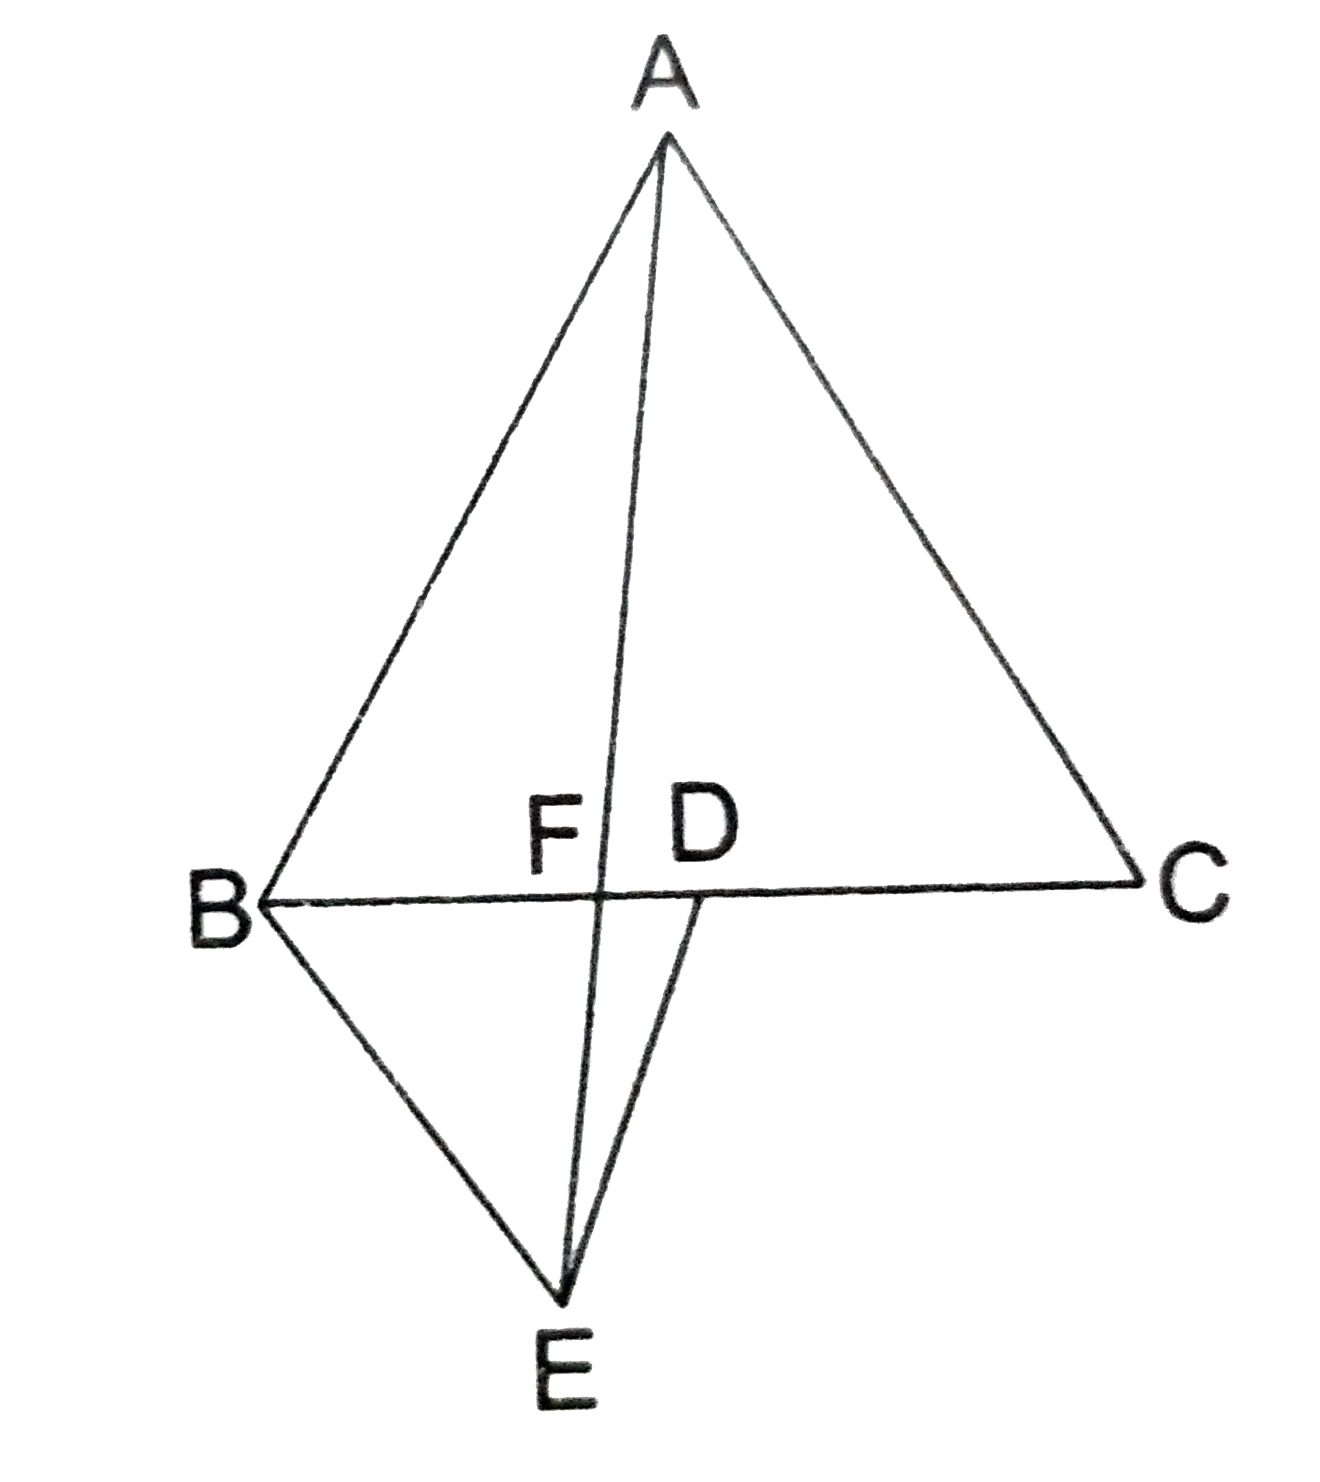 In the adjoining figure, ABC and BDE are two equilateral triangle such that D is the midpoint of BC. If AE intersects BC at F, show that    (i) ar(triangleBDE)=
(1)/(4)ar(triangleABC)   (ii) ar(triangleBDE)=(1)/(2)ar(triangleBAE)    (iii) ar(triangleABC)=2ar(triangleBEC)   (iv) ar(triangleBFE)=ar(triangleAFD)   (v)ar(triangleBFE)=2ar(triangleFED)   (vi) ar(triangleFED)=(1)/(8)ar(triangleAFC).